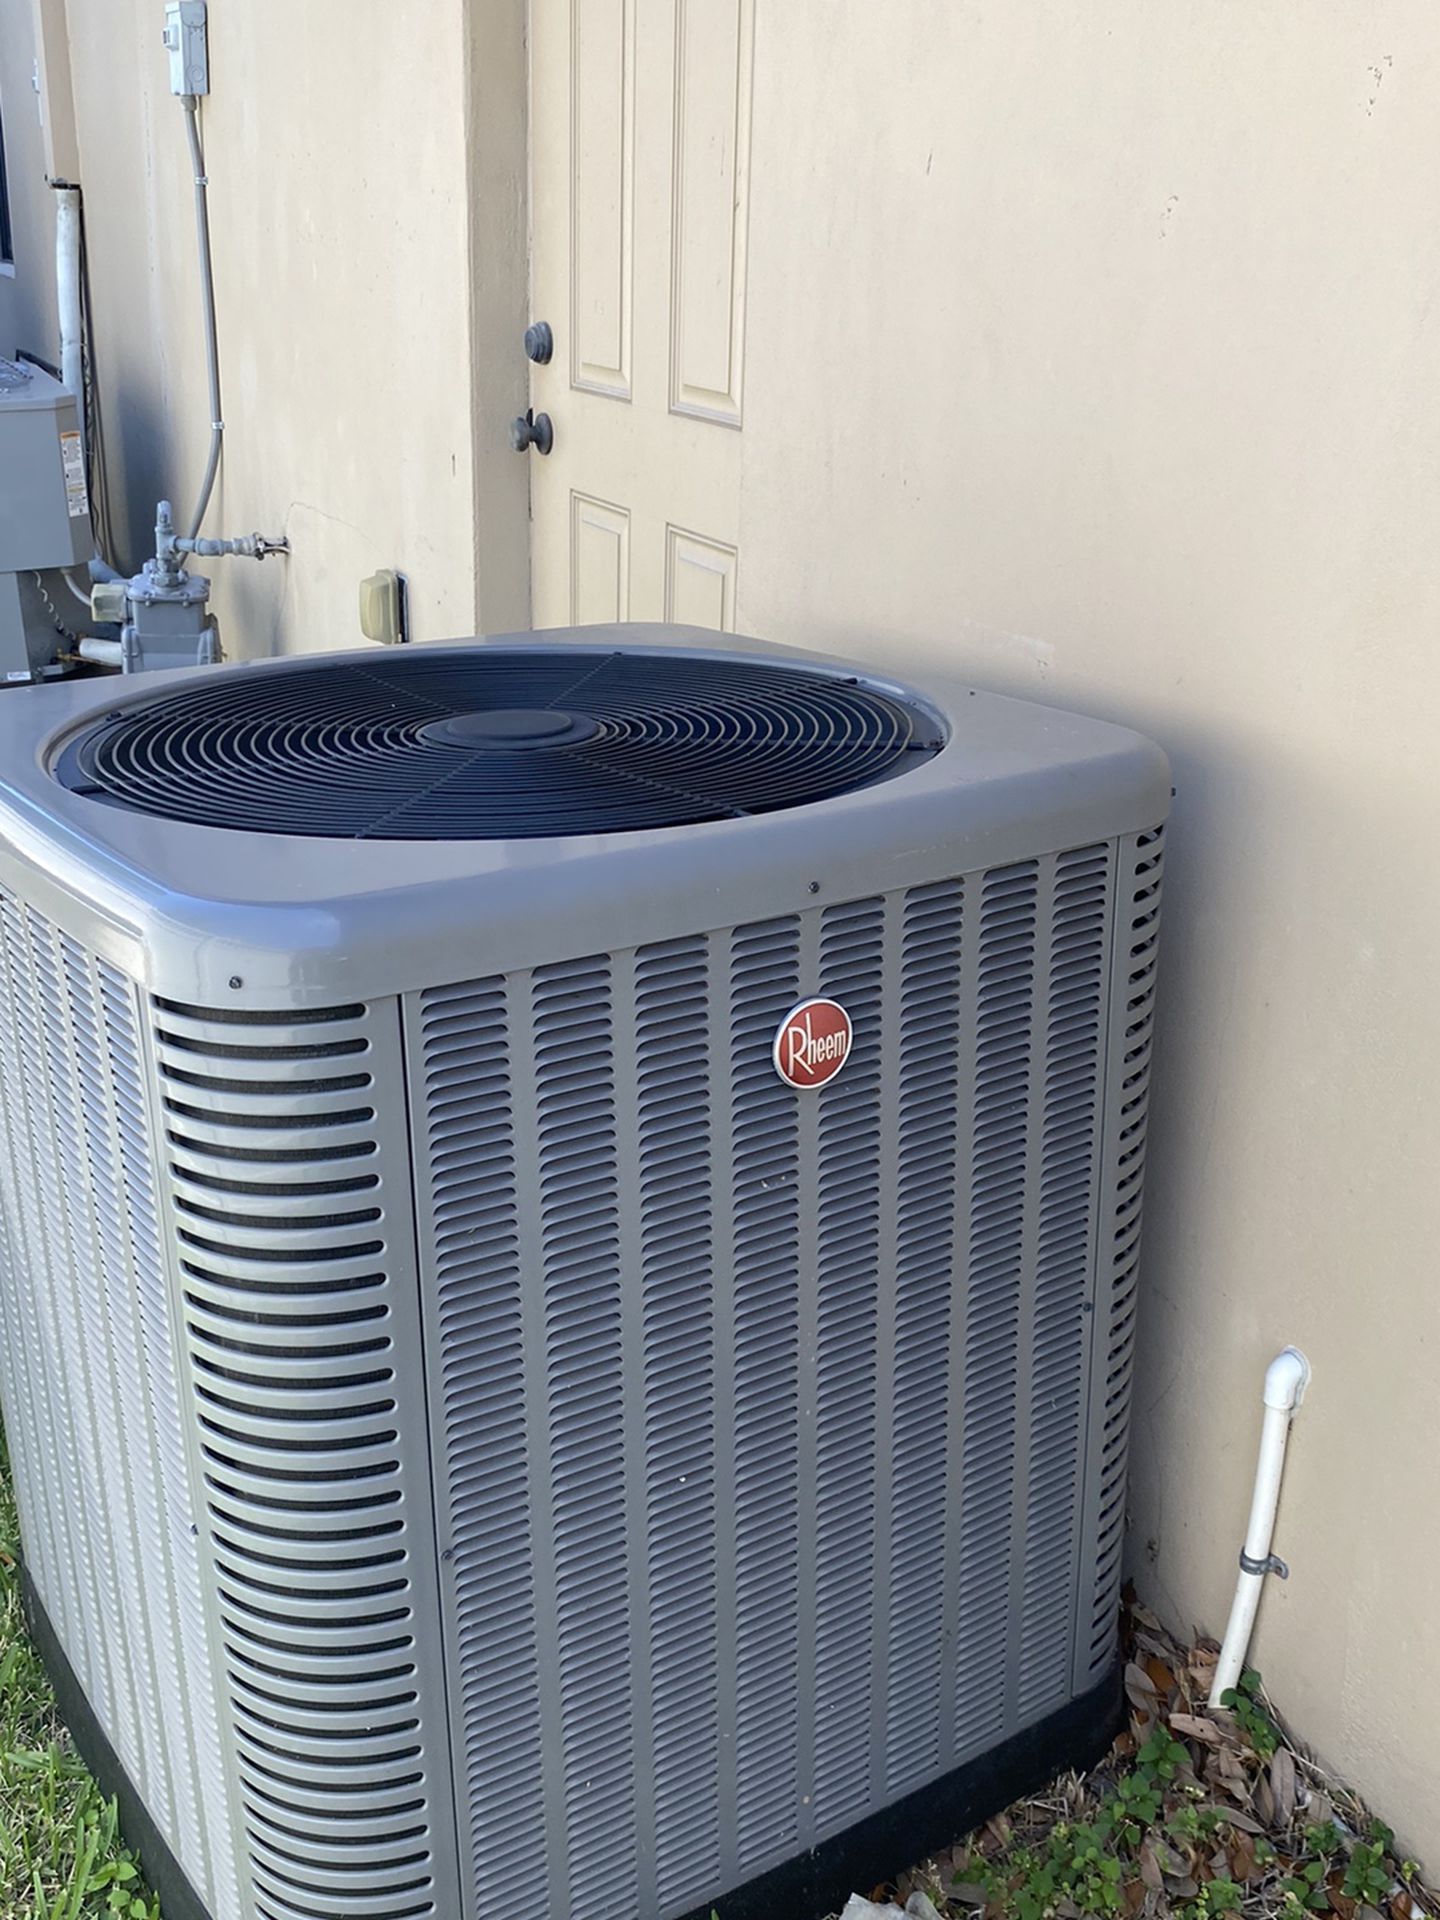 4 Ton AC Condenser  Less Than 2 Years Old With Existing Warranty  Still Has Freon Inside  